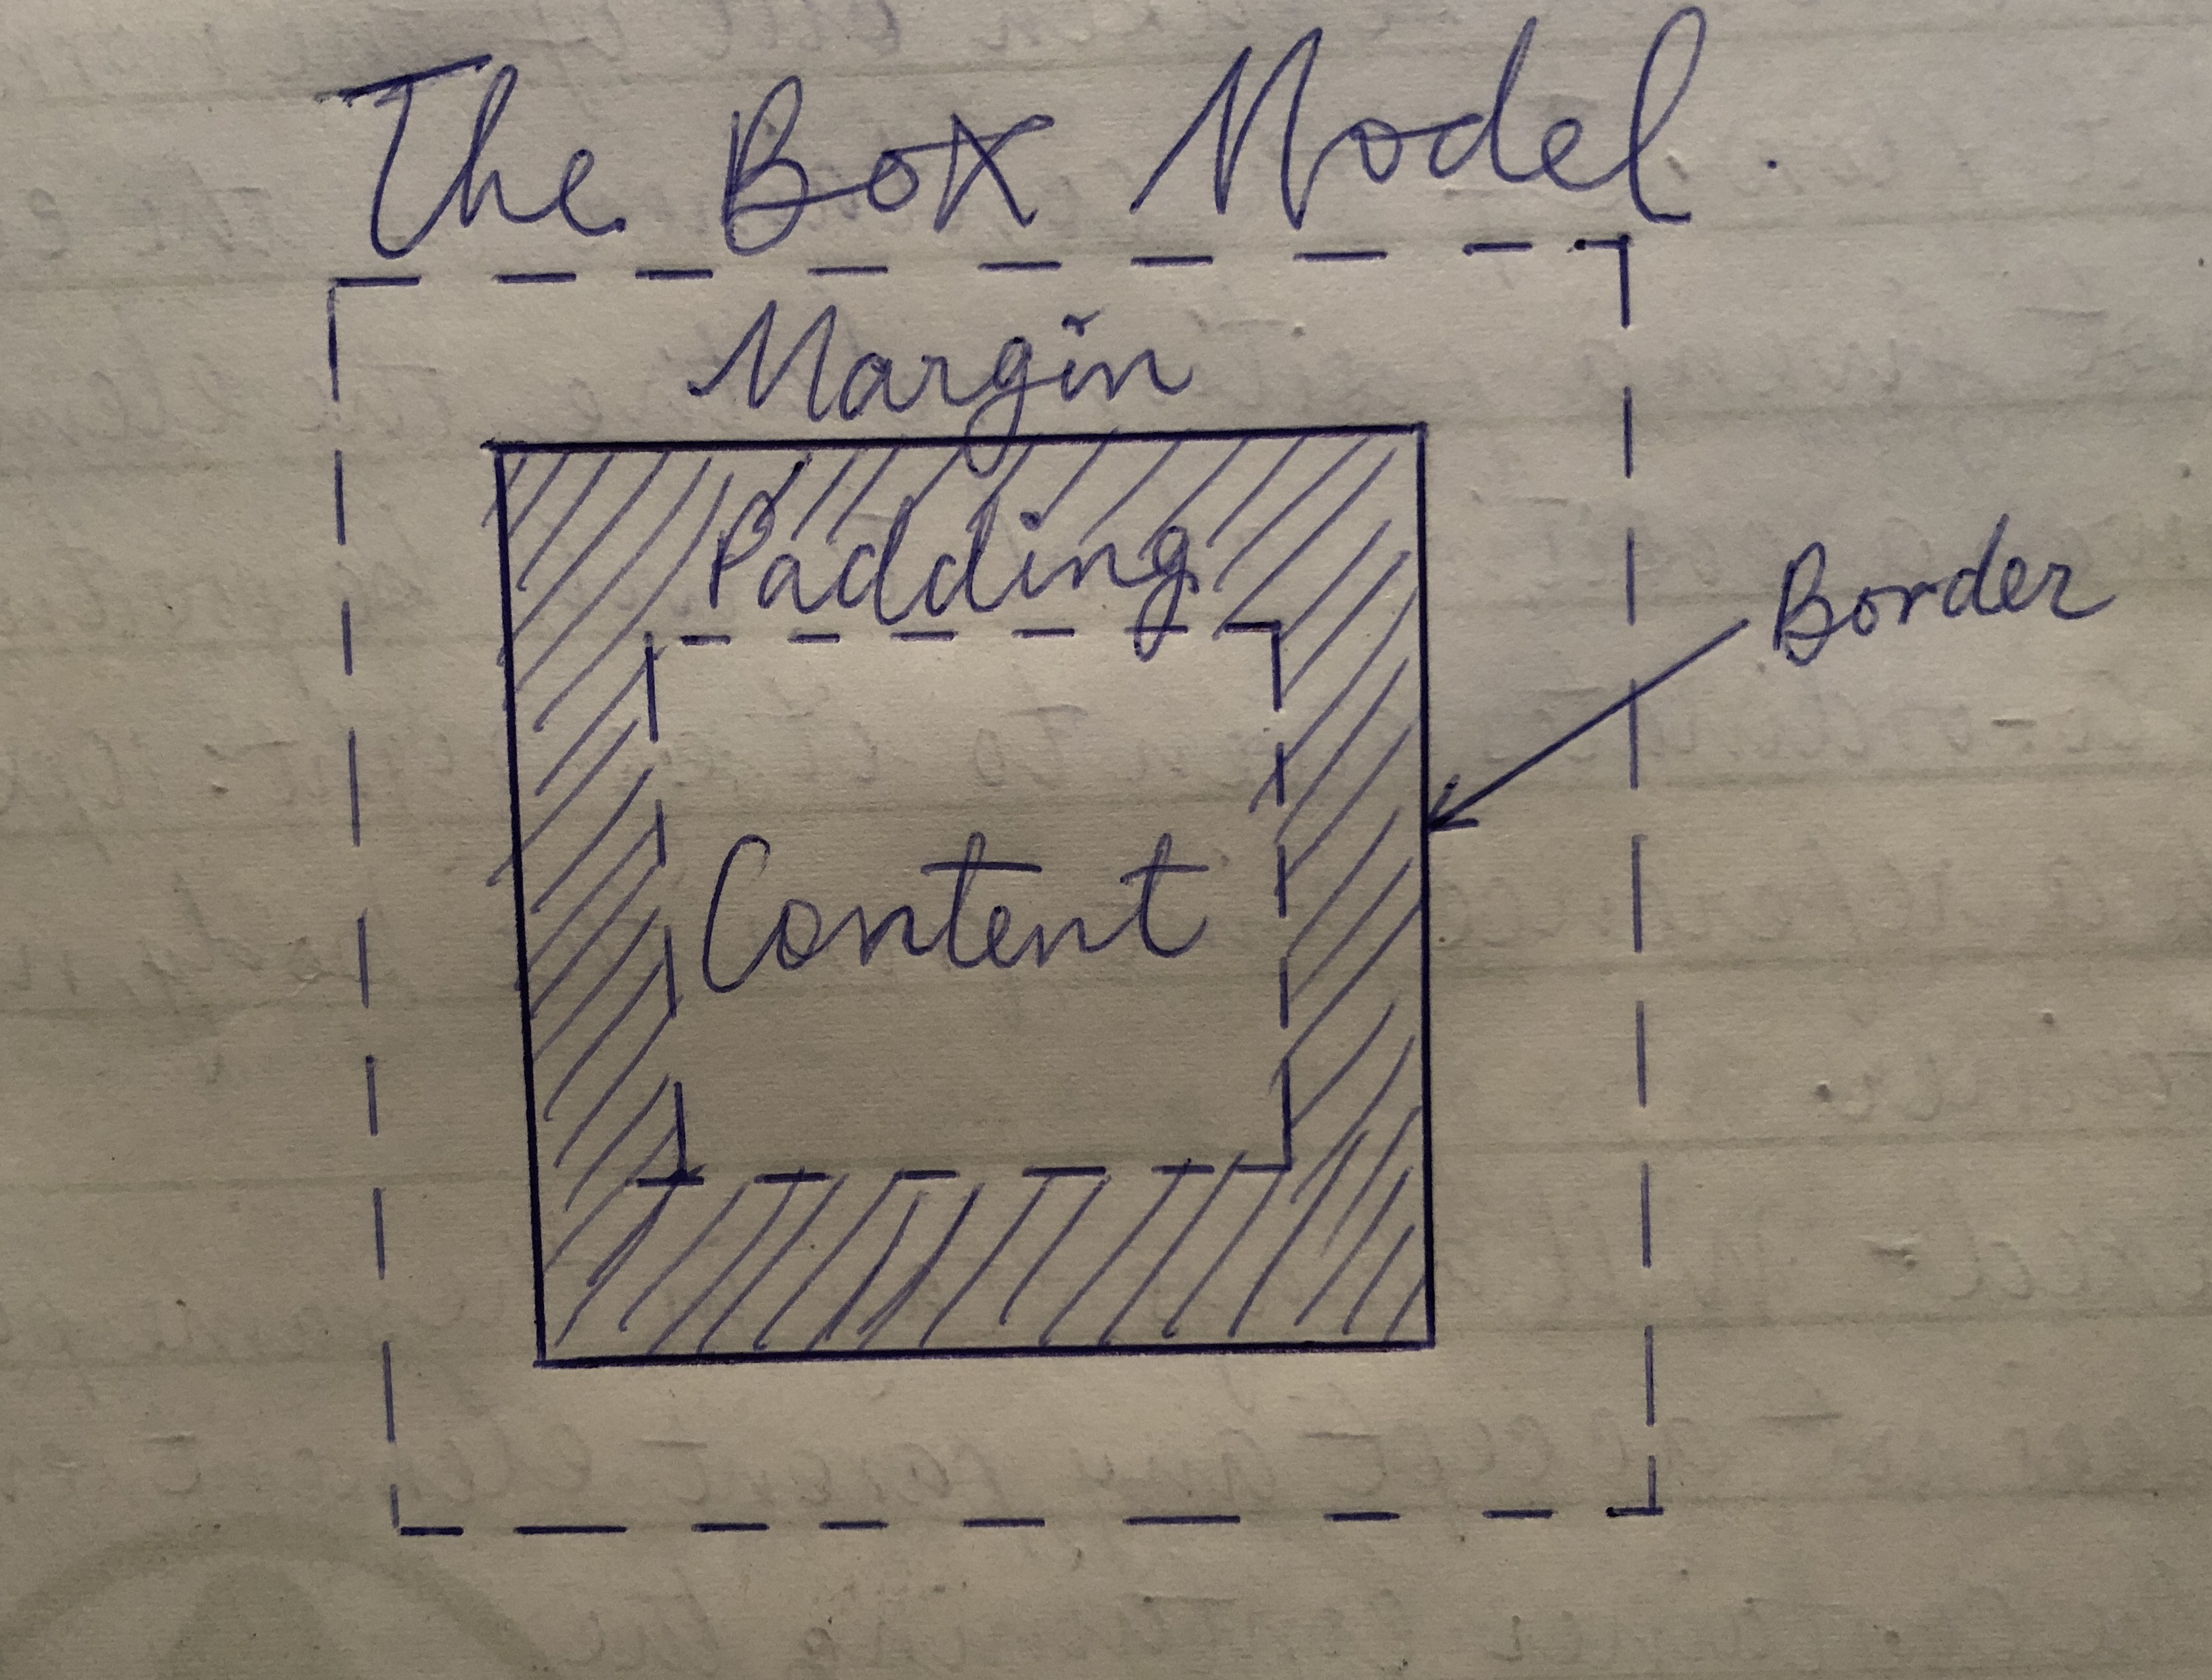 A diagram showing all the components of the box model